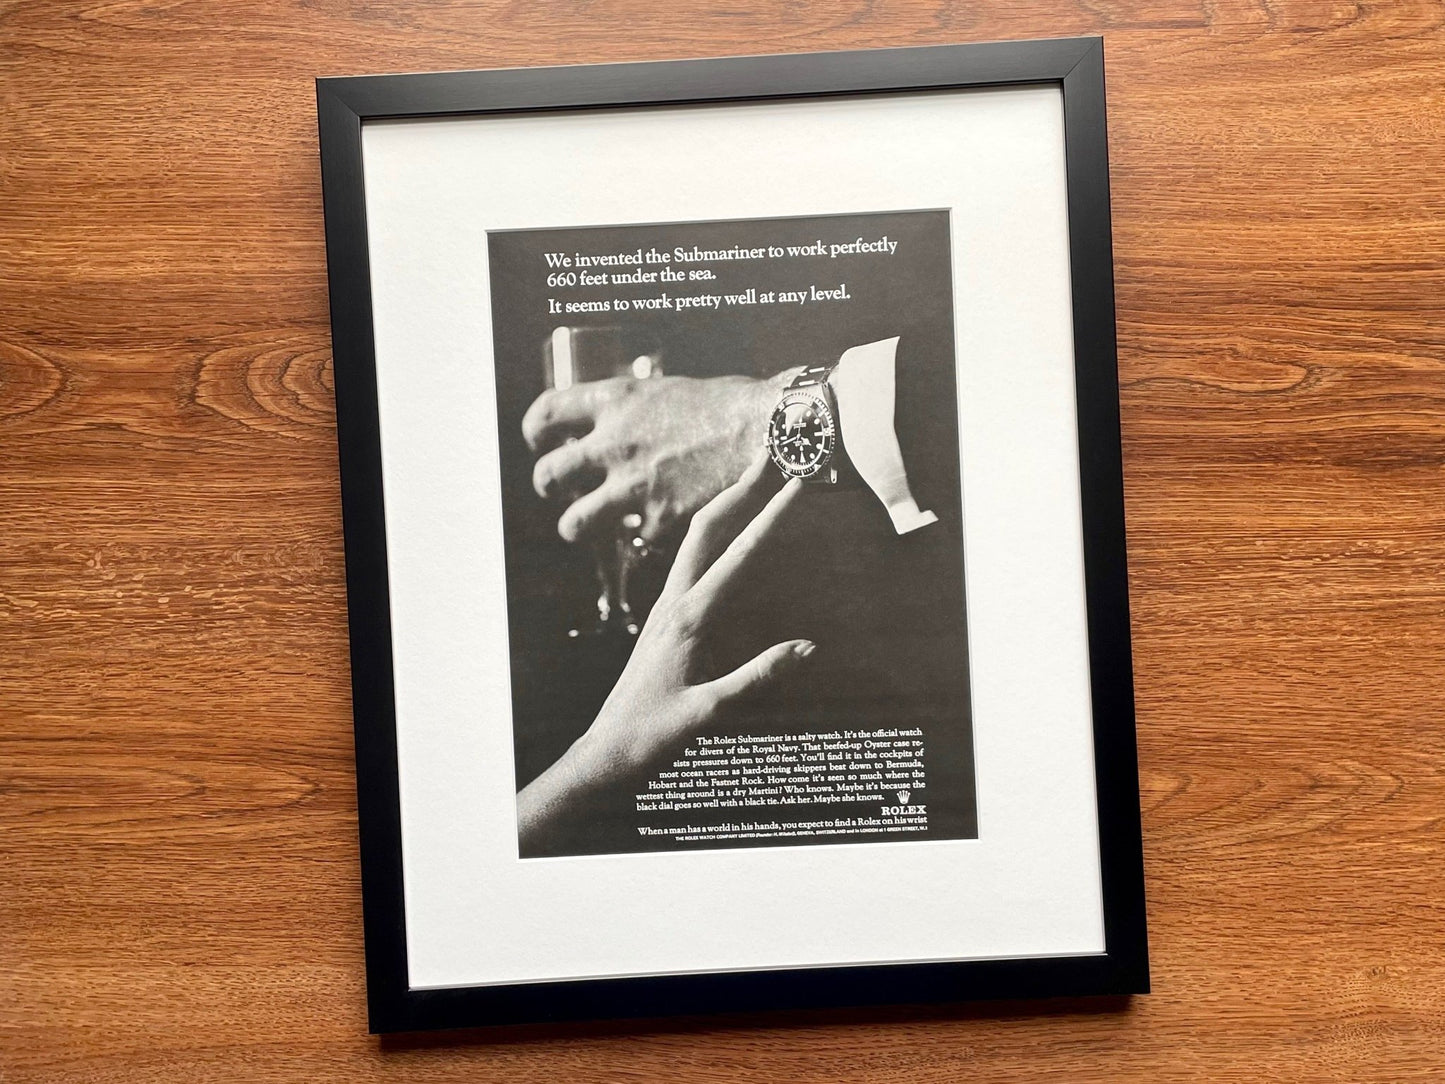 1966 Rolex Submariner Ad Reprint in Wood Black Limited Frame